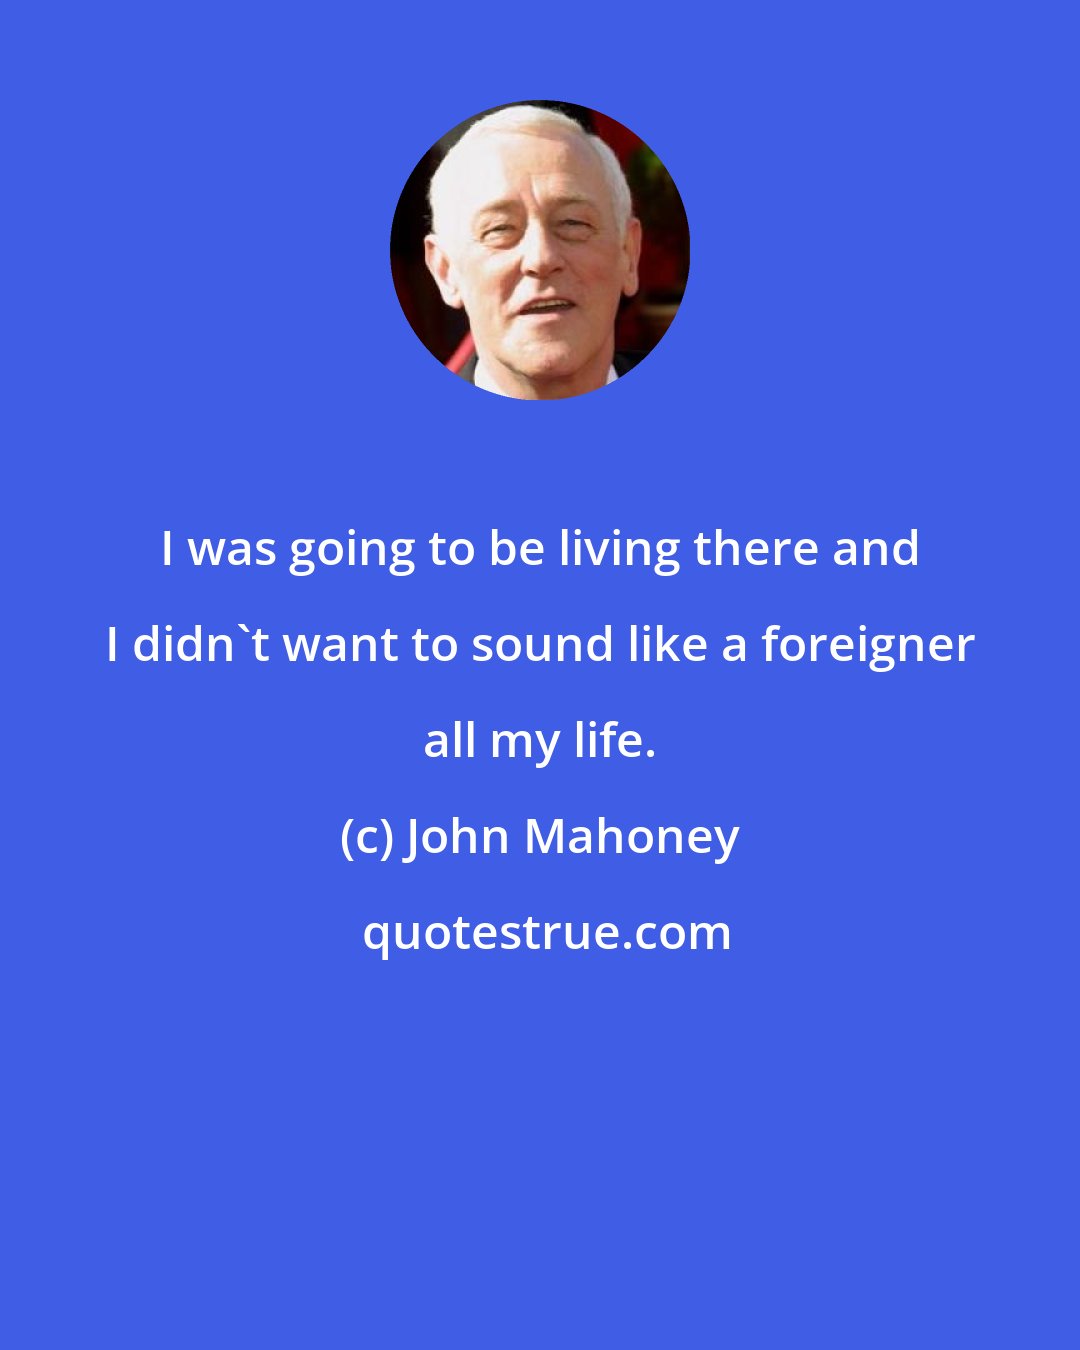 John Mahoney: I was going to be living there and I didn't want to sound like a foreigner all my life.